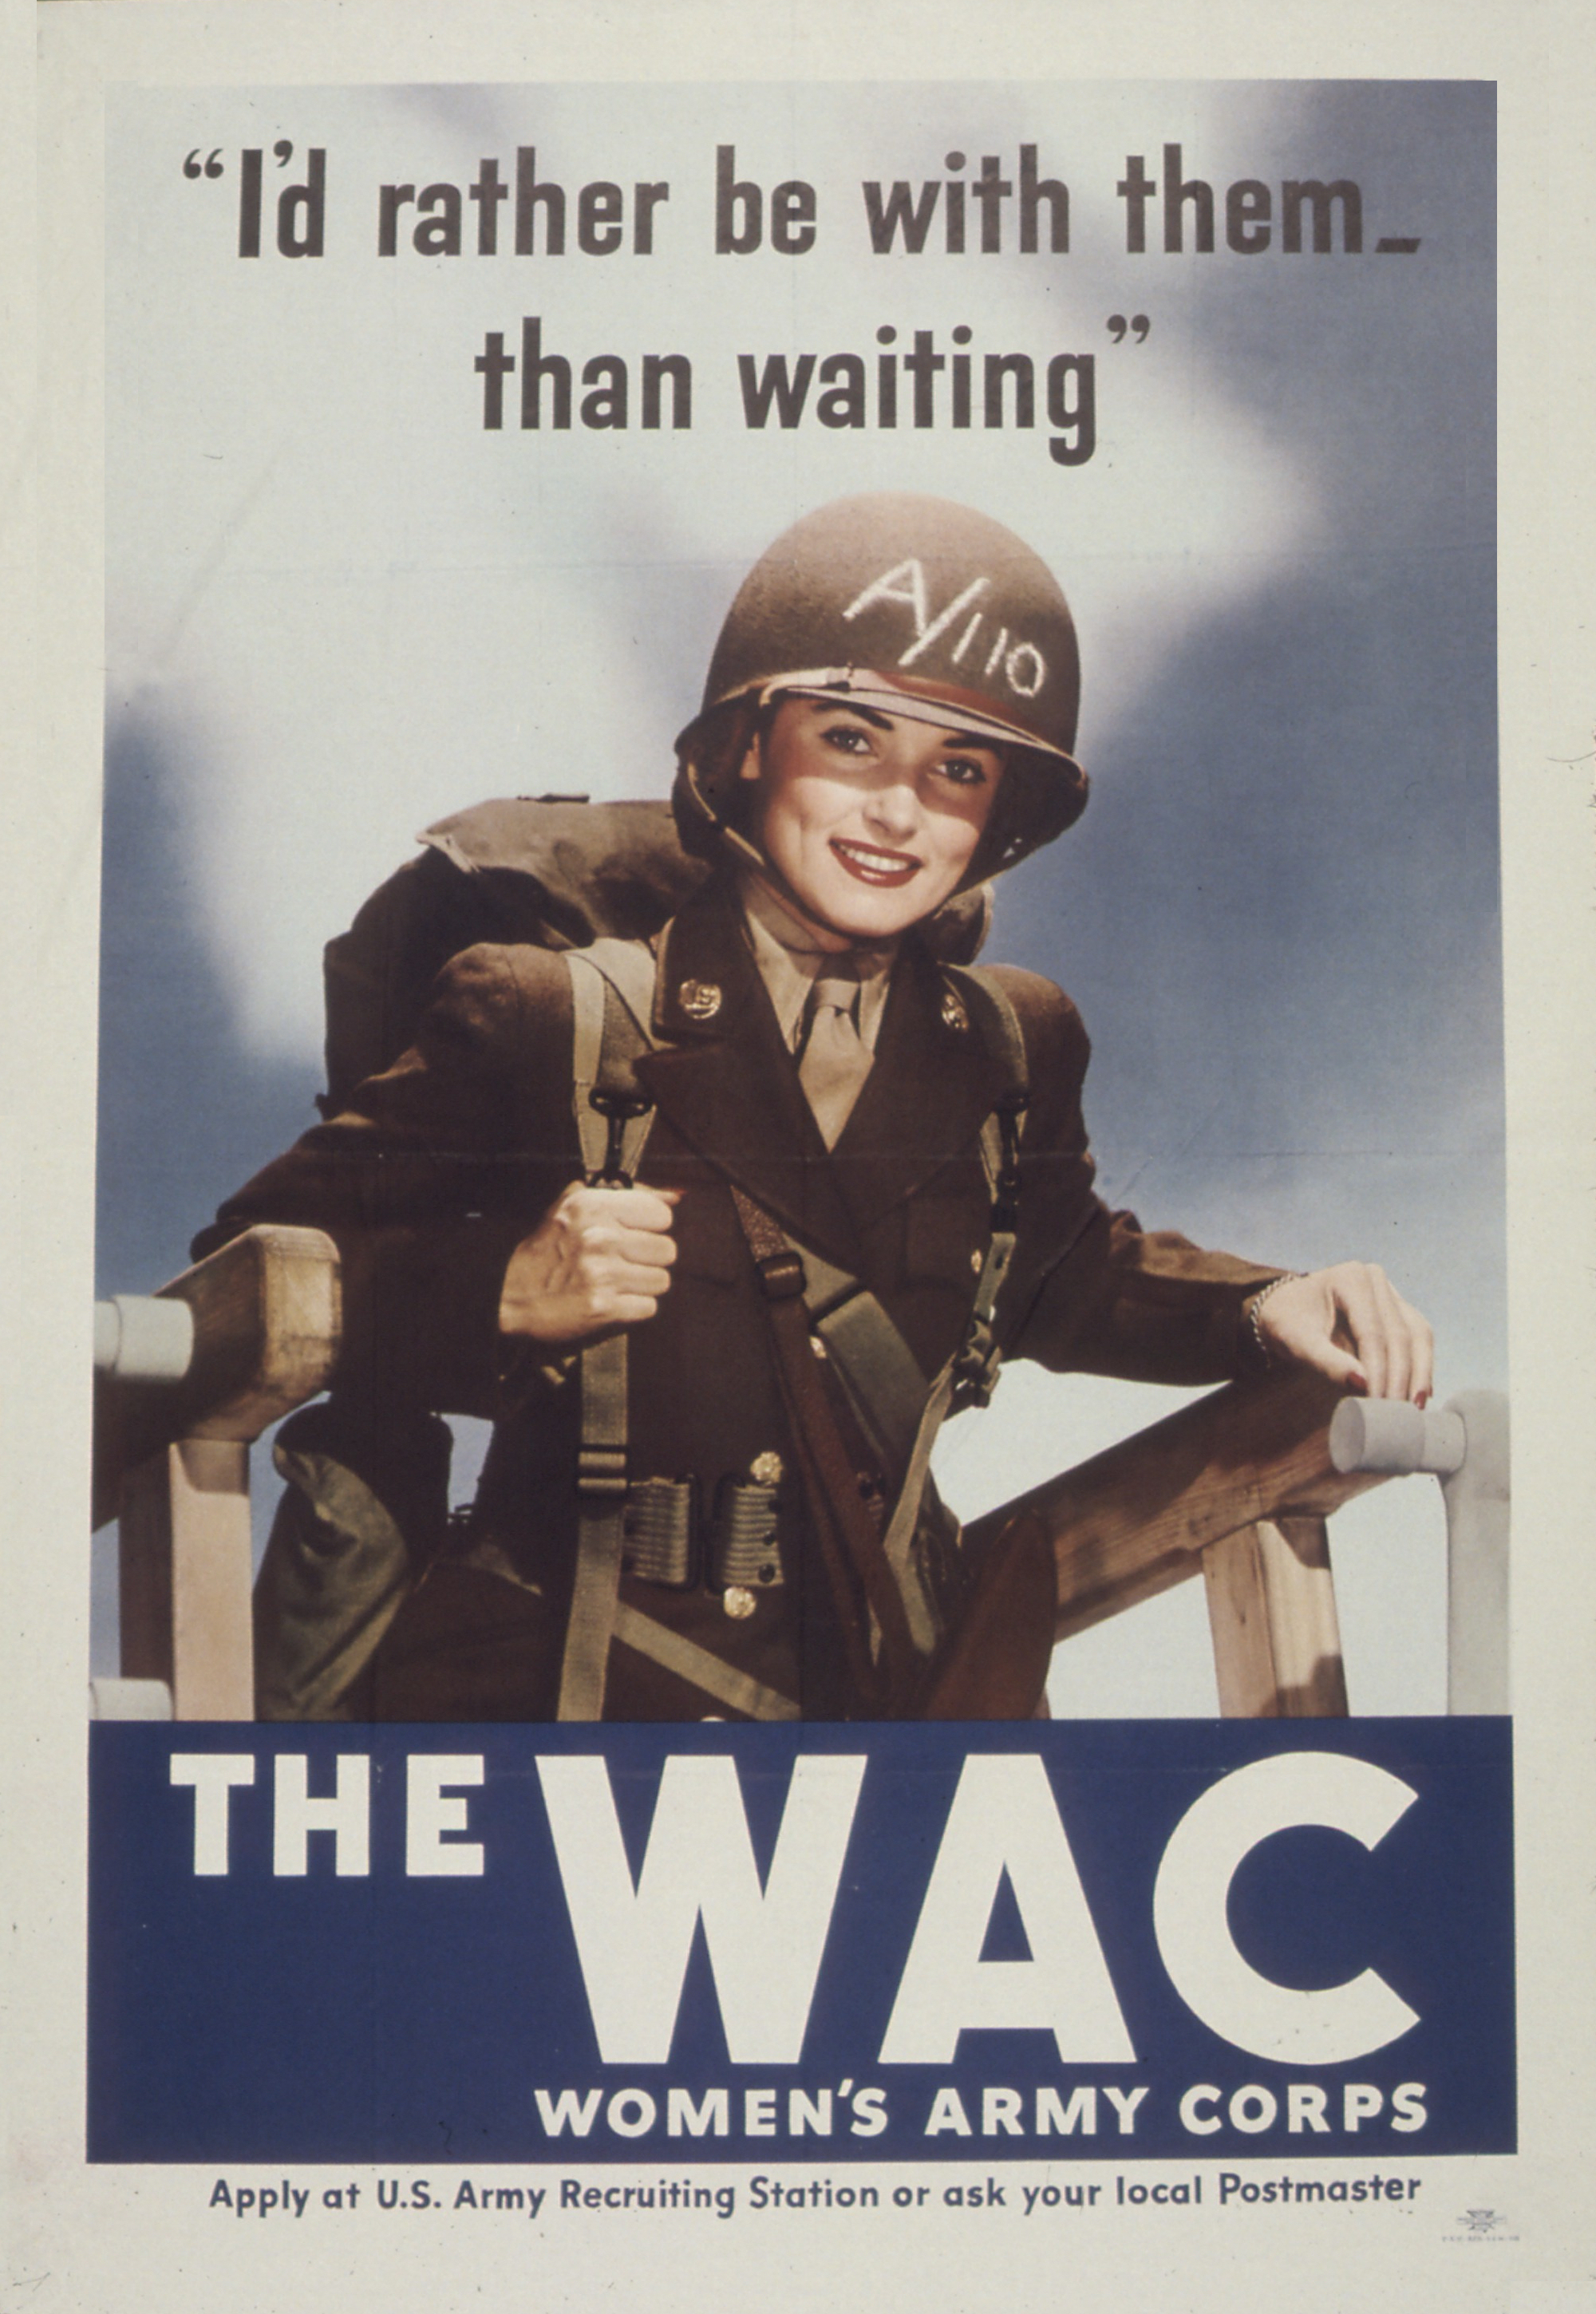 Rather Be With Them WAC Recruiting Poster